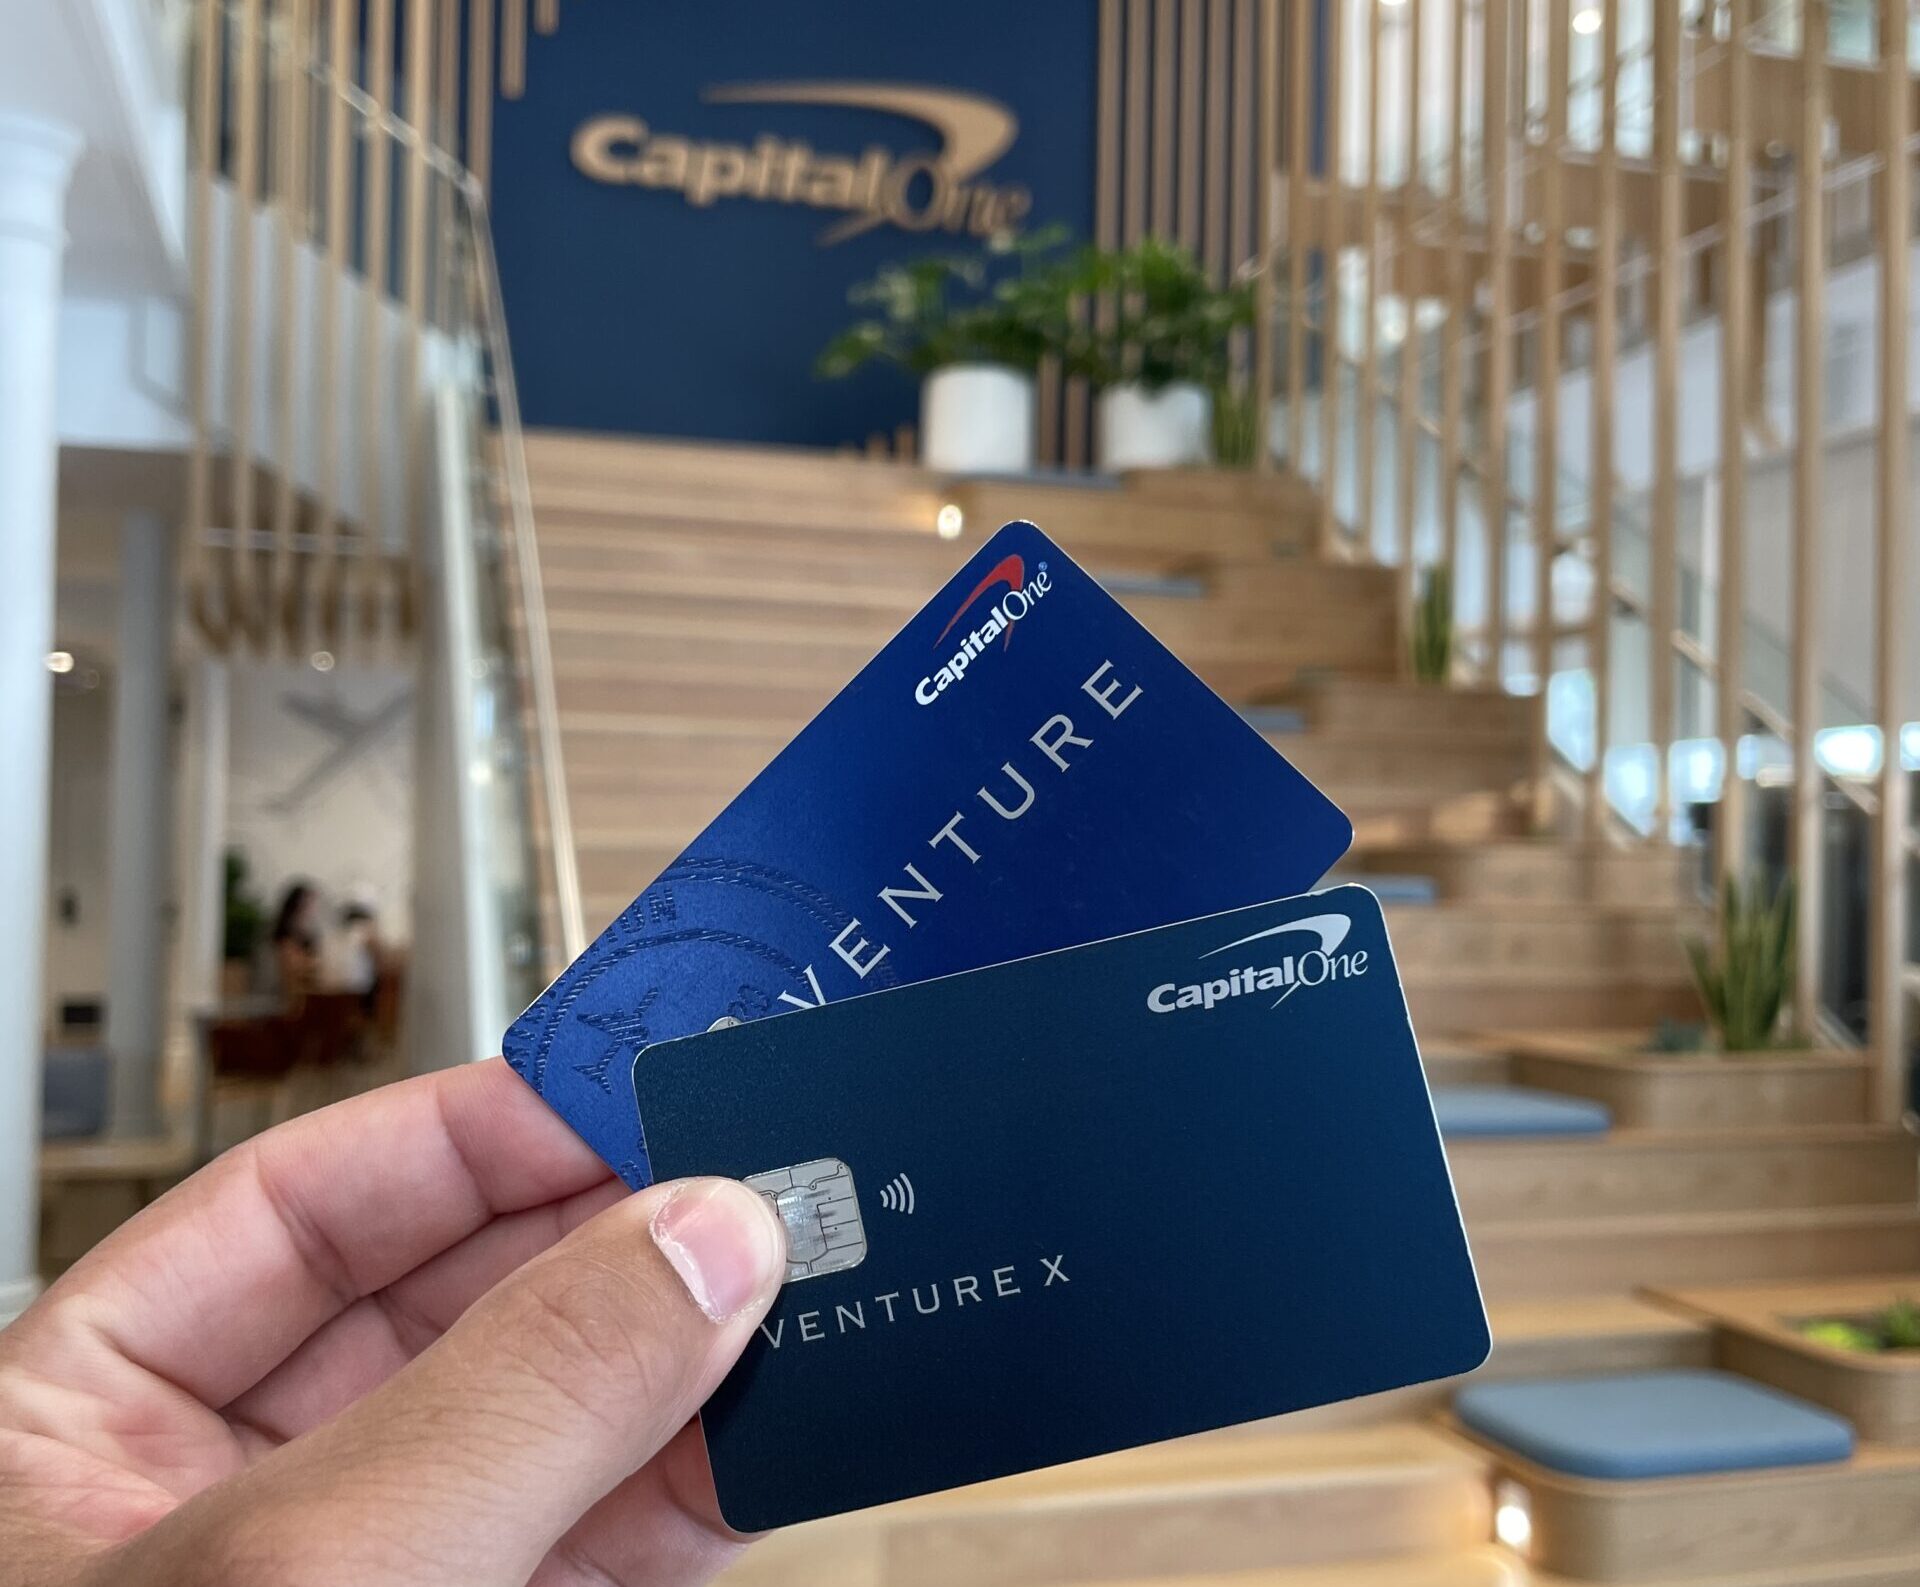 The Must Have Venture Credit Card from Capital One